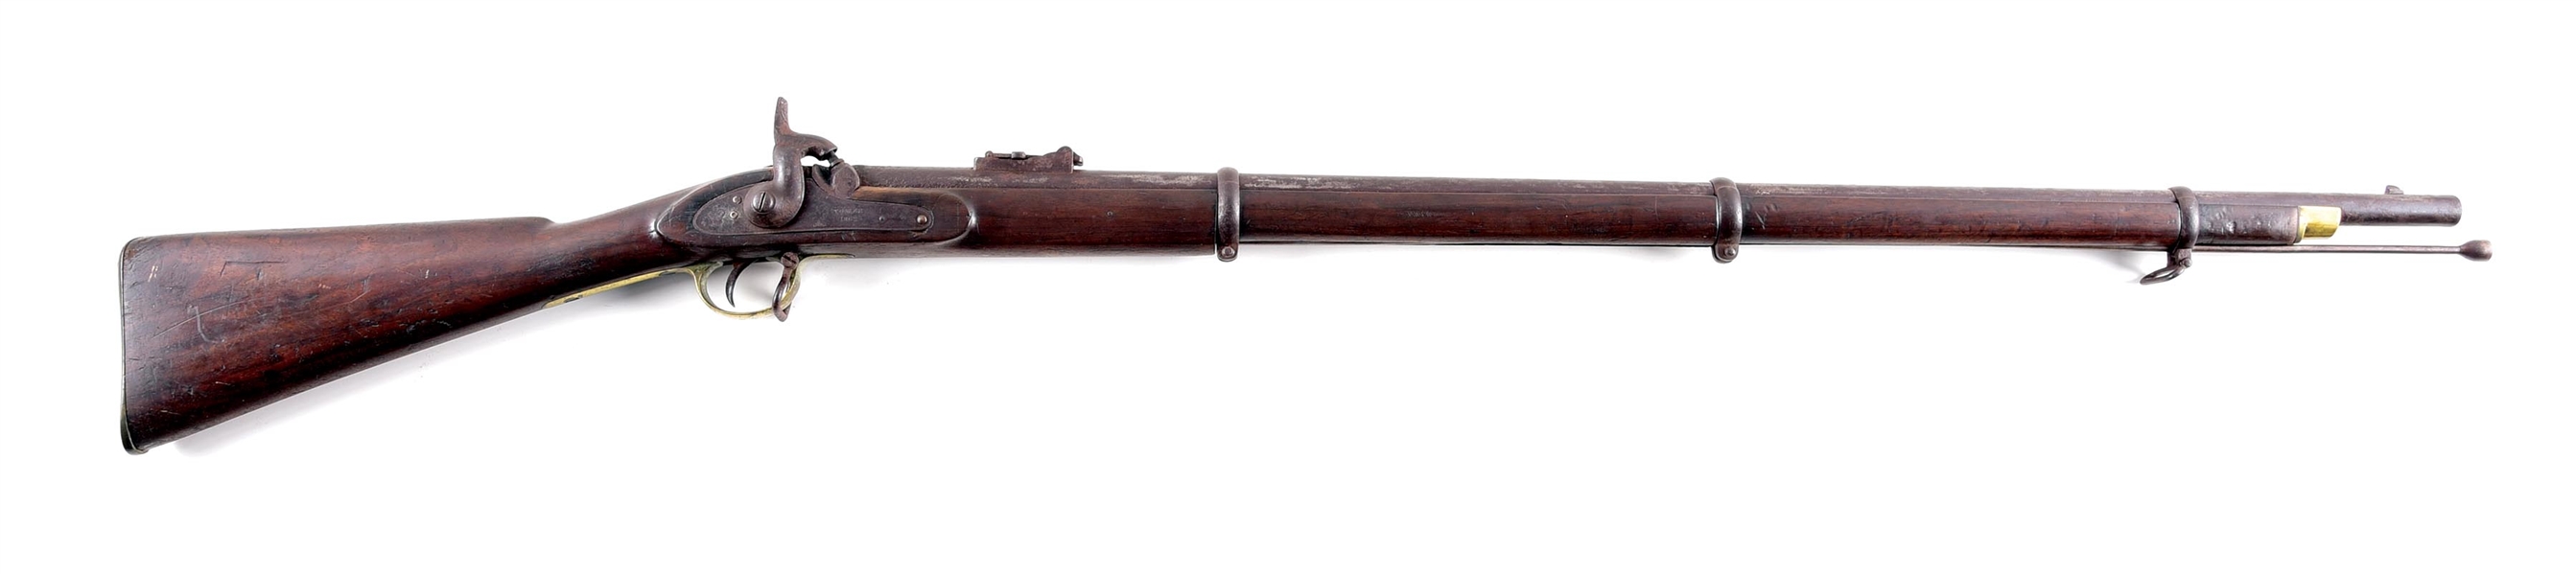 (A) ENFIELD MODEL 1862 PERCUSSION RIFLE.